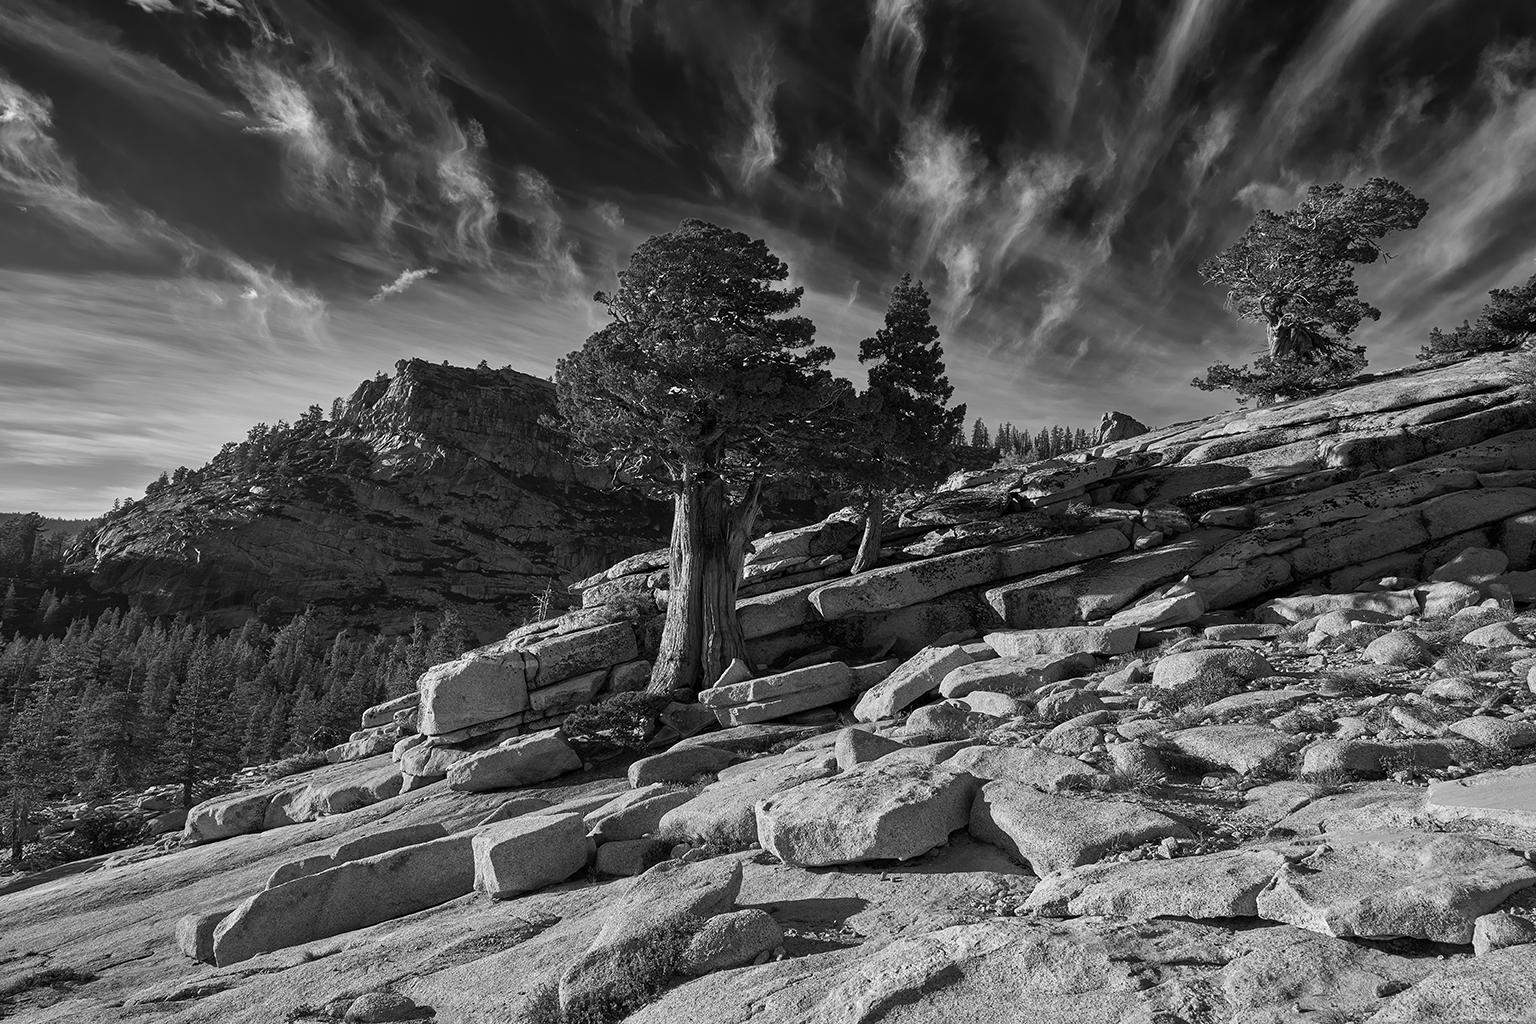 Tree Study I - large scale photograph of dramatic mountain landscape - Contemporary Print by Frank Schott